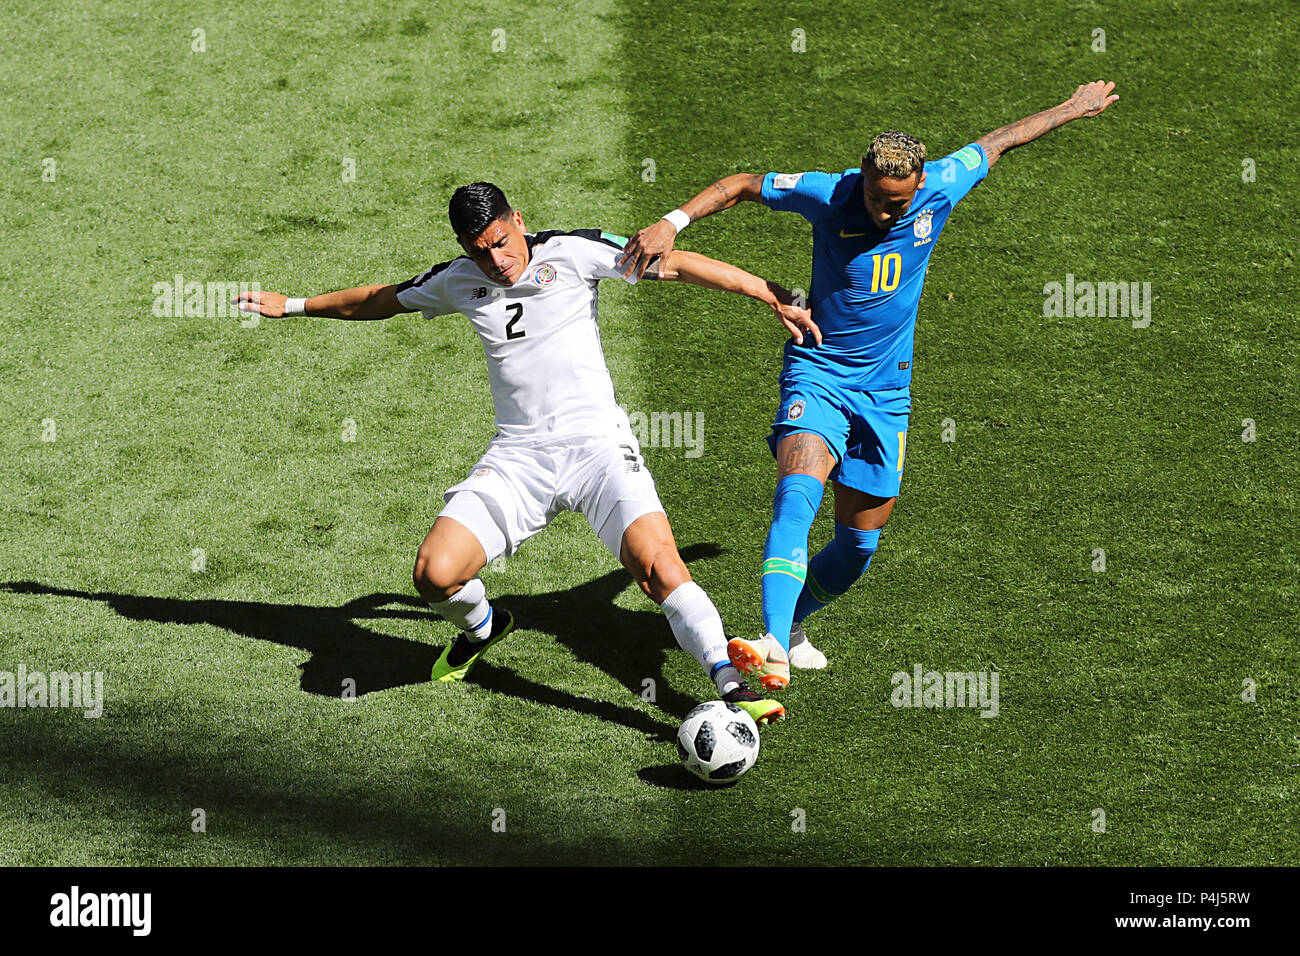 Costa Rica's Johnny Acosta (left) and Brazil's Neymar battle for the ball during the FIFA World Cup Group E match at Saint Petersburg Stadium, Russia. Stock Photo